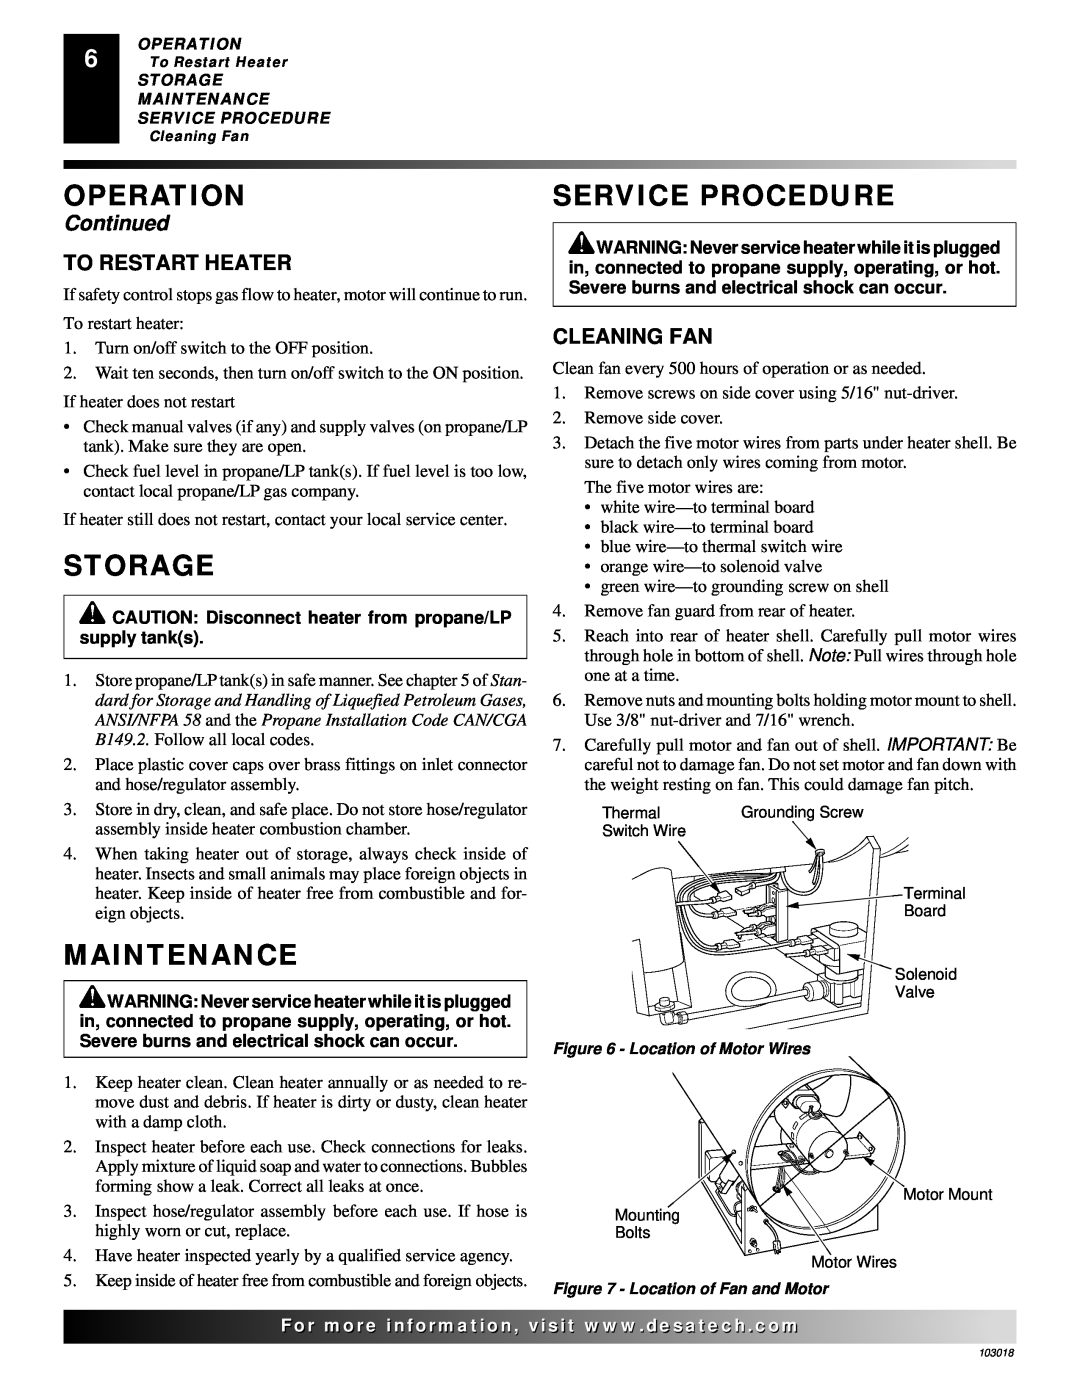 Desa AT Series owner manual Storage, Service Procedure, Maintenance, Operation, Continued 